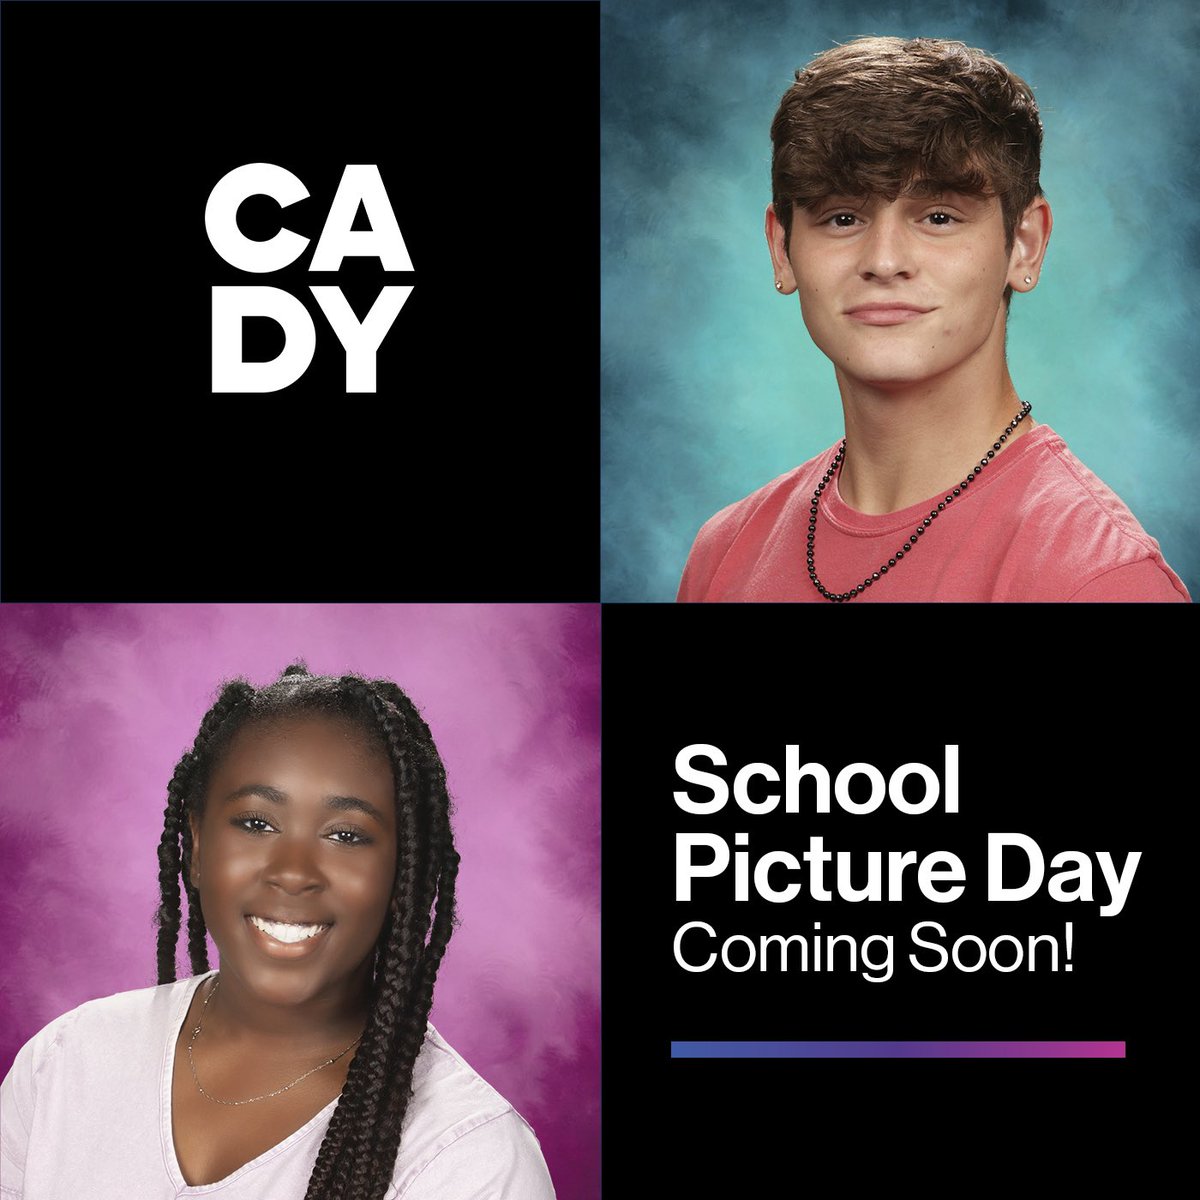 Don’t miss your chance to be in the yearbook! Picture Day is Friday, Aug. 18. Purchase a package BEFORE Picture Day to save $10! Check out this deal at CADY.com/PictureDay #CADY #CADYpics